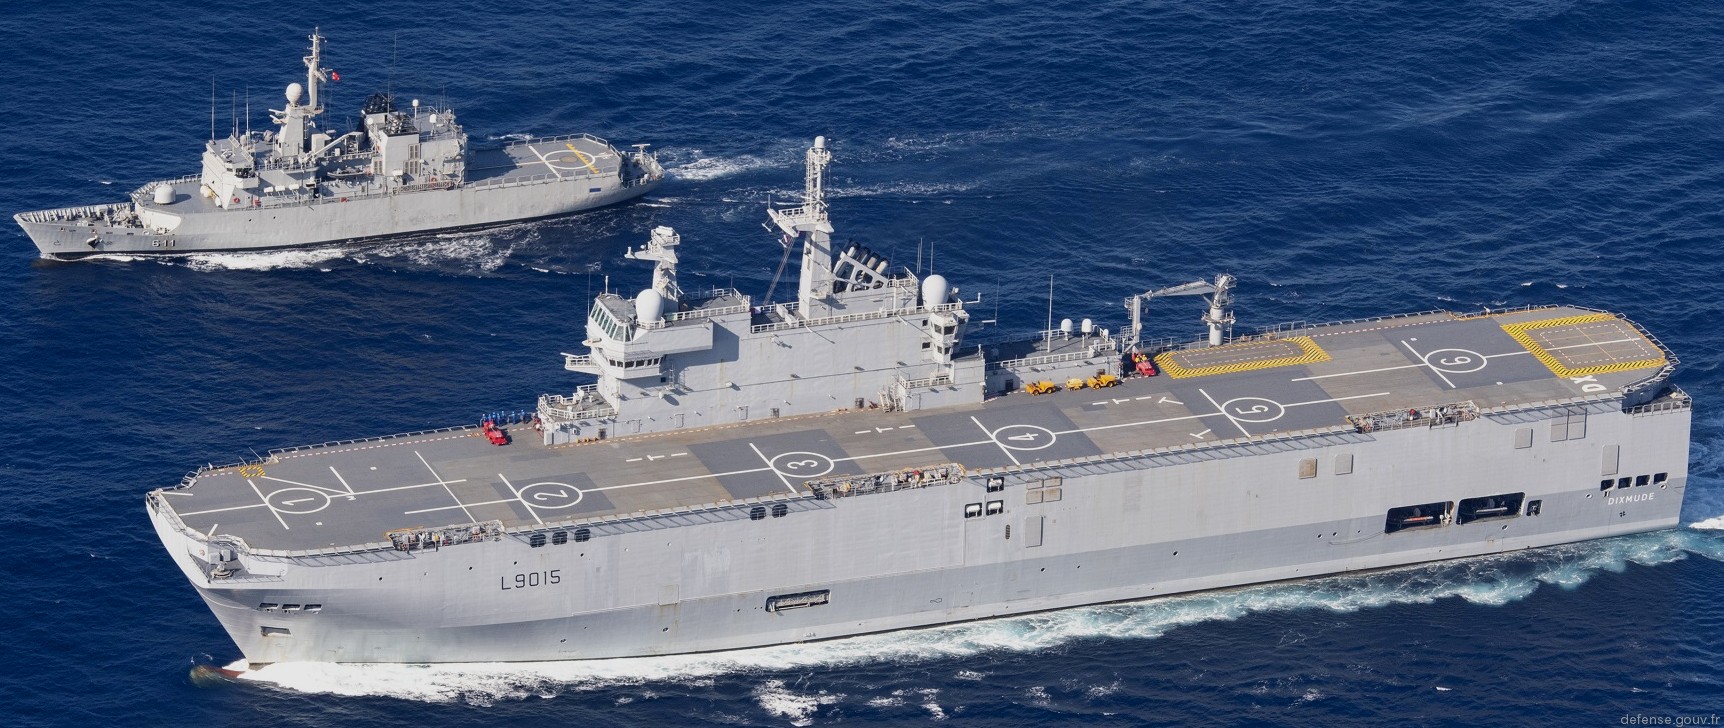 l-9015 fs dixmude mistral class amphibious assault command ship bpc french navy marine nationale 54